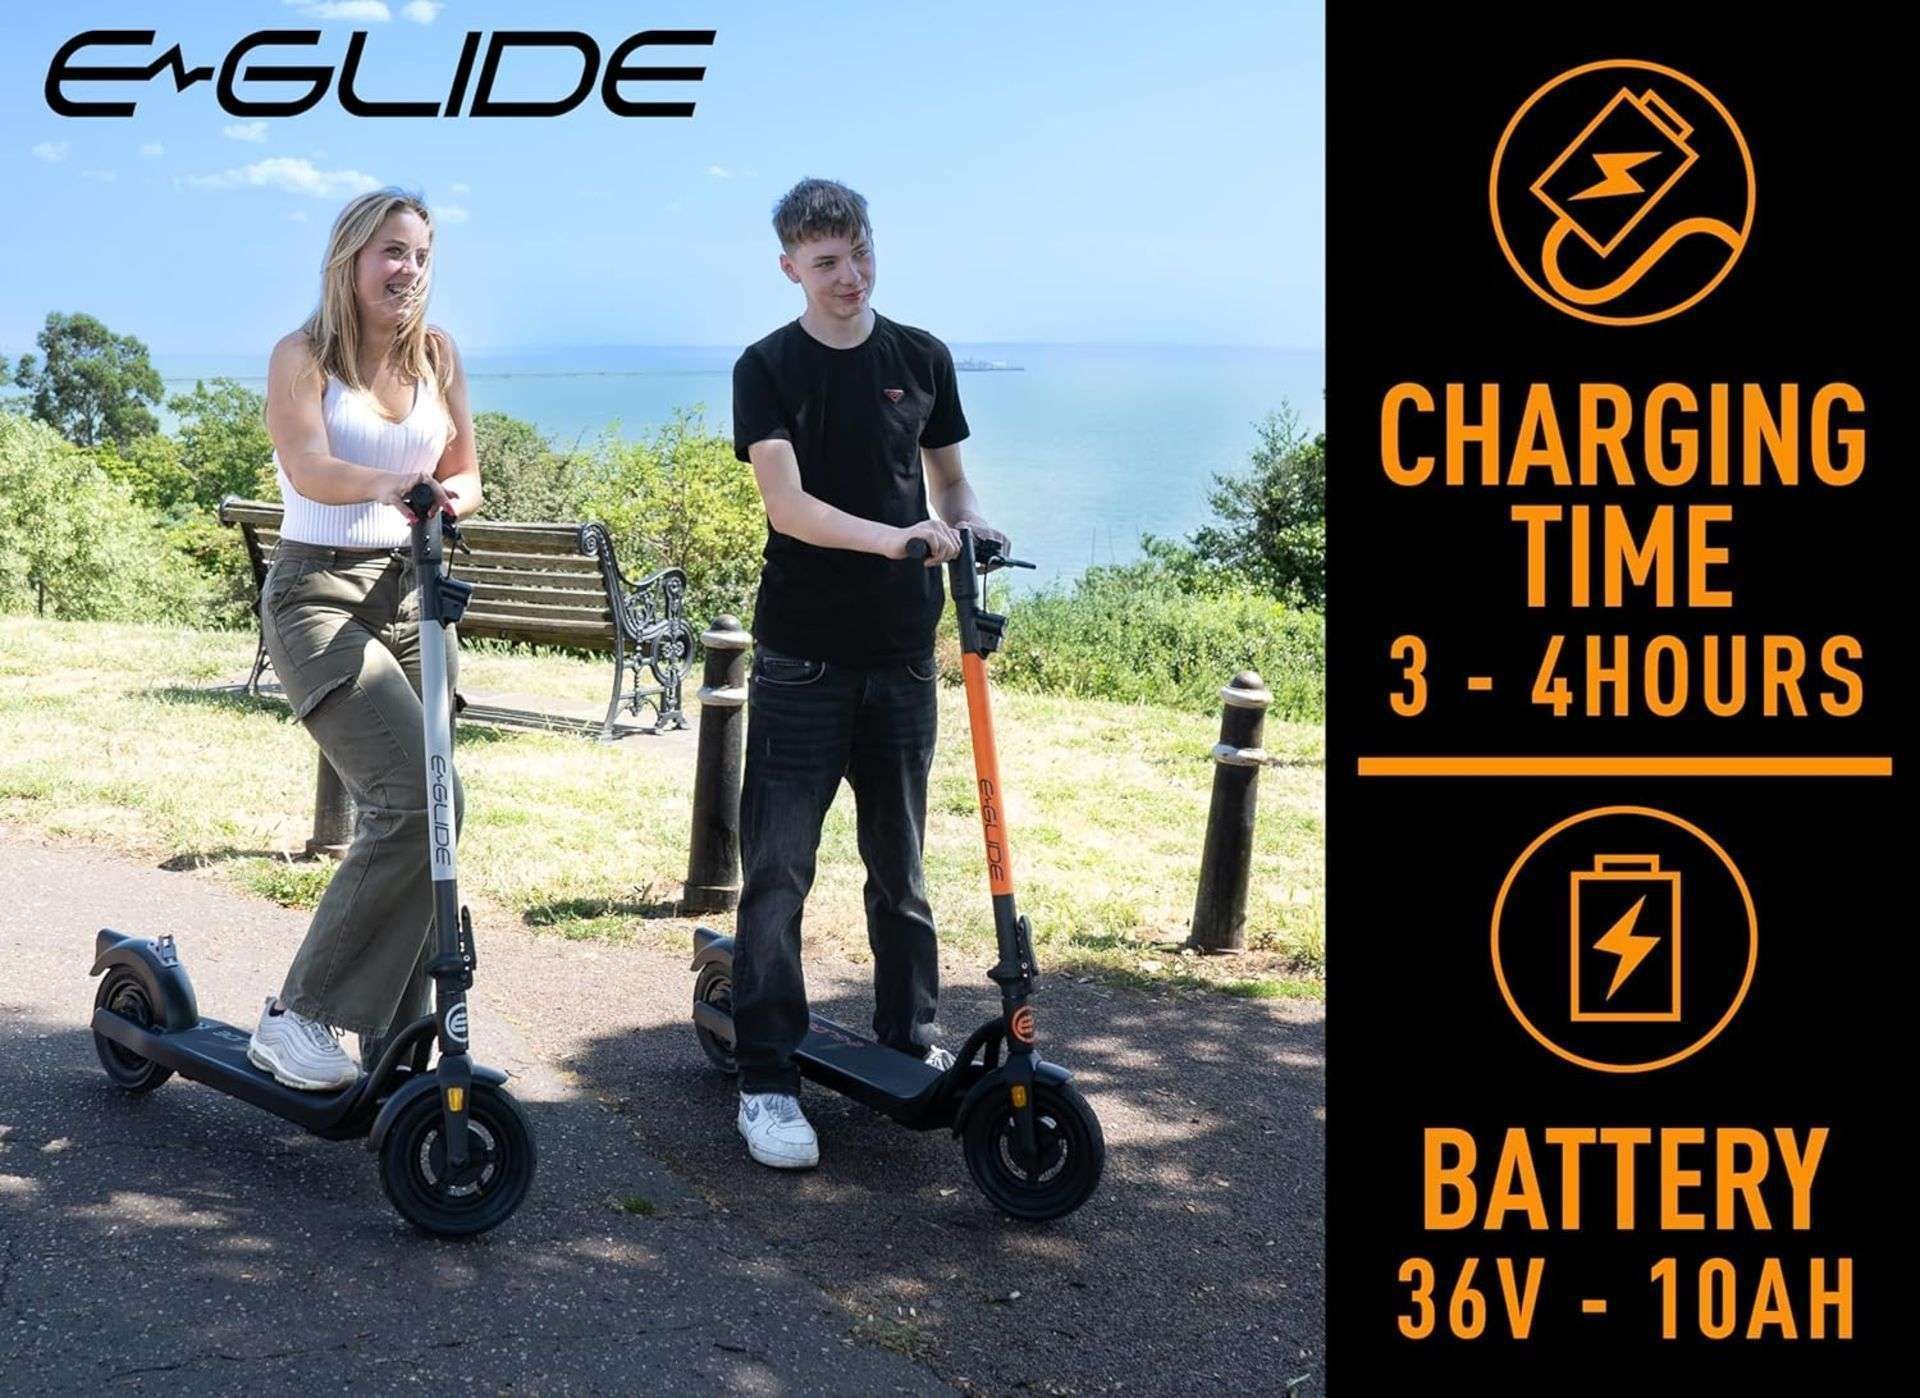 Brand New E-Glide V2 Electric Scooter Orange and Black RRP £599, Introducing a sleek and efficient - Image 4 of 5